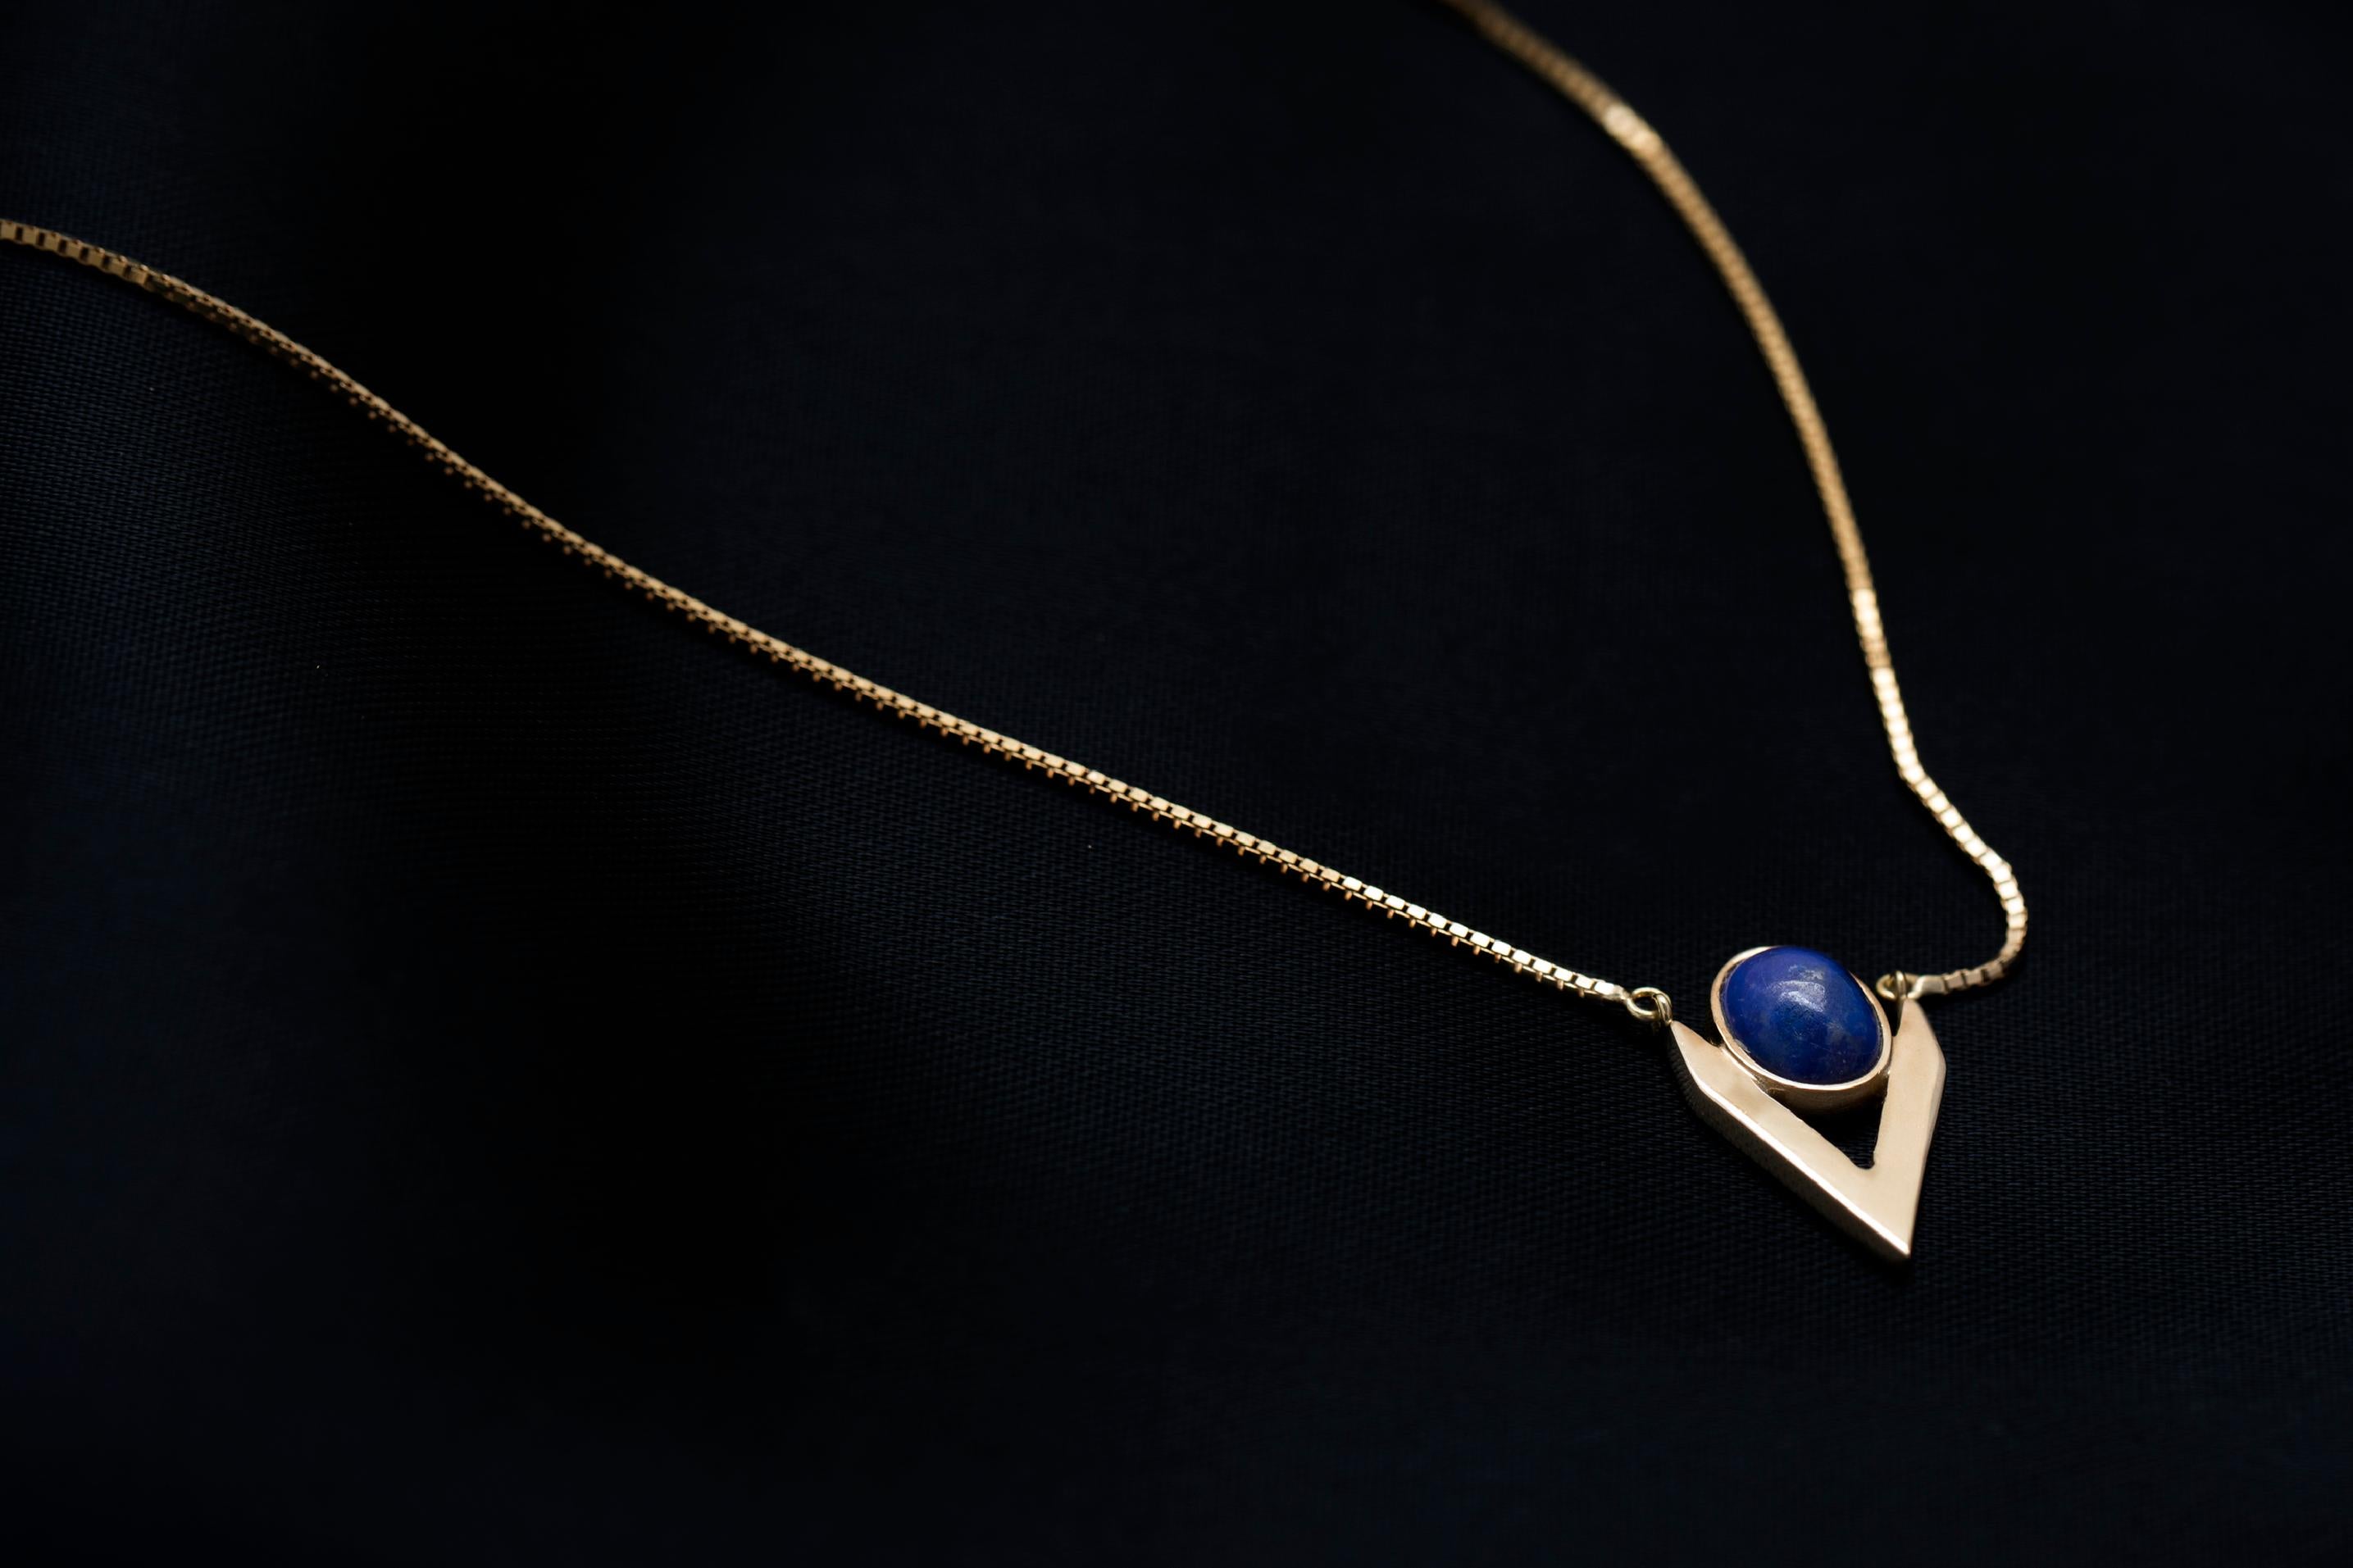 Iosselliani jewellery pieces are intended to be the new classic with an edgy style. Designed with a 9 Karat gold chain, the necklace features a lapis lazuli cabochon framed into a V shape. Bringing geometry to your look this piece will allow you to